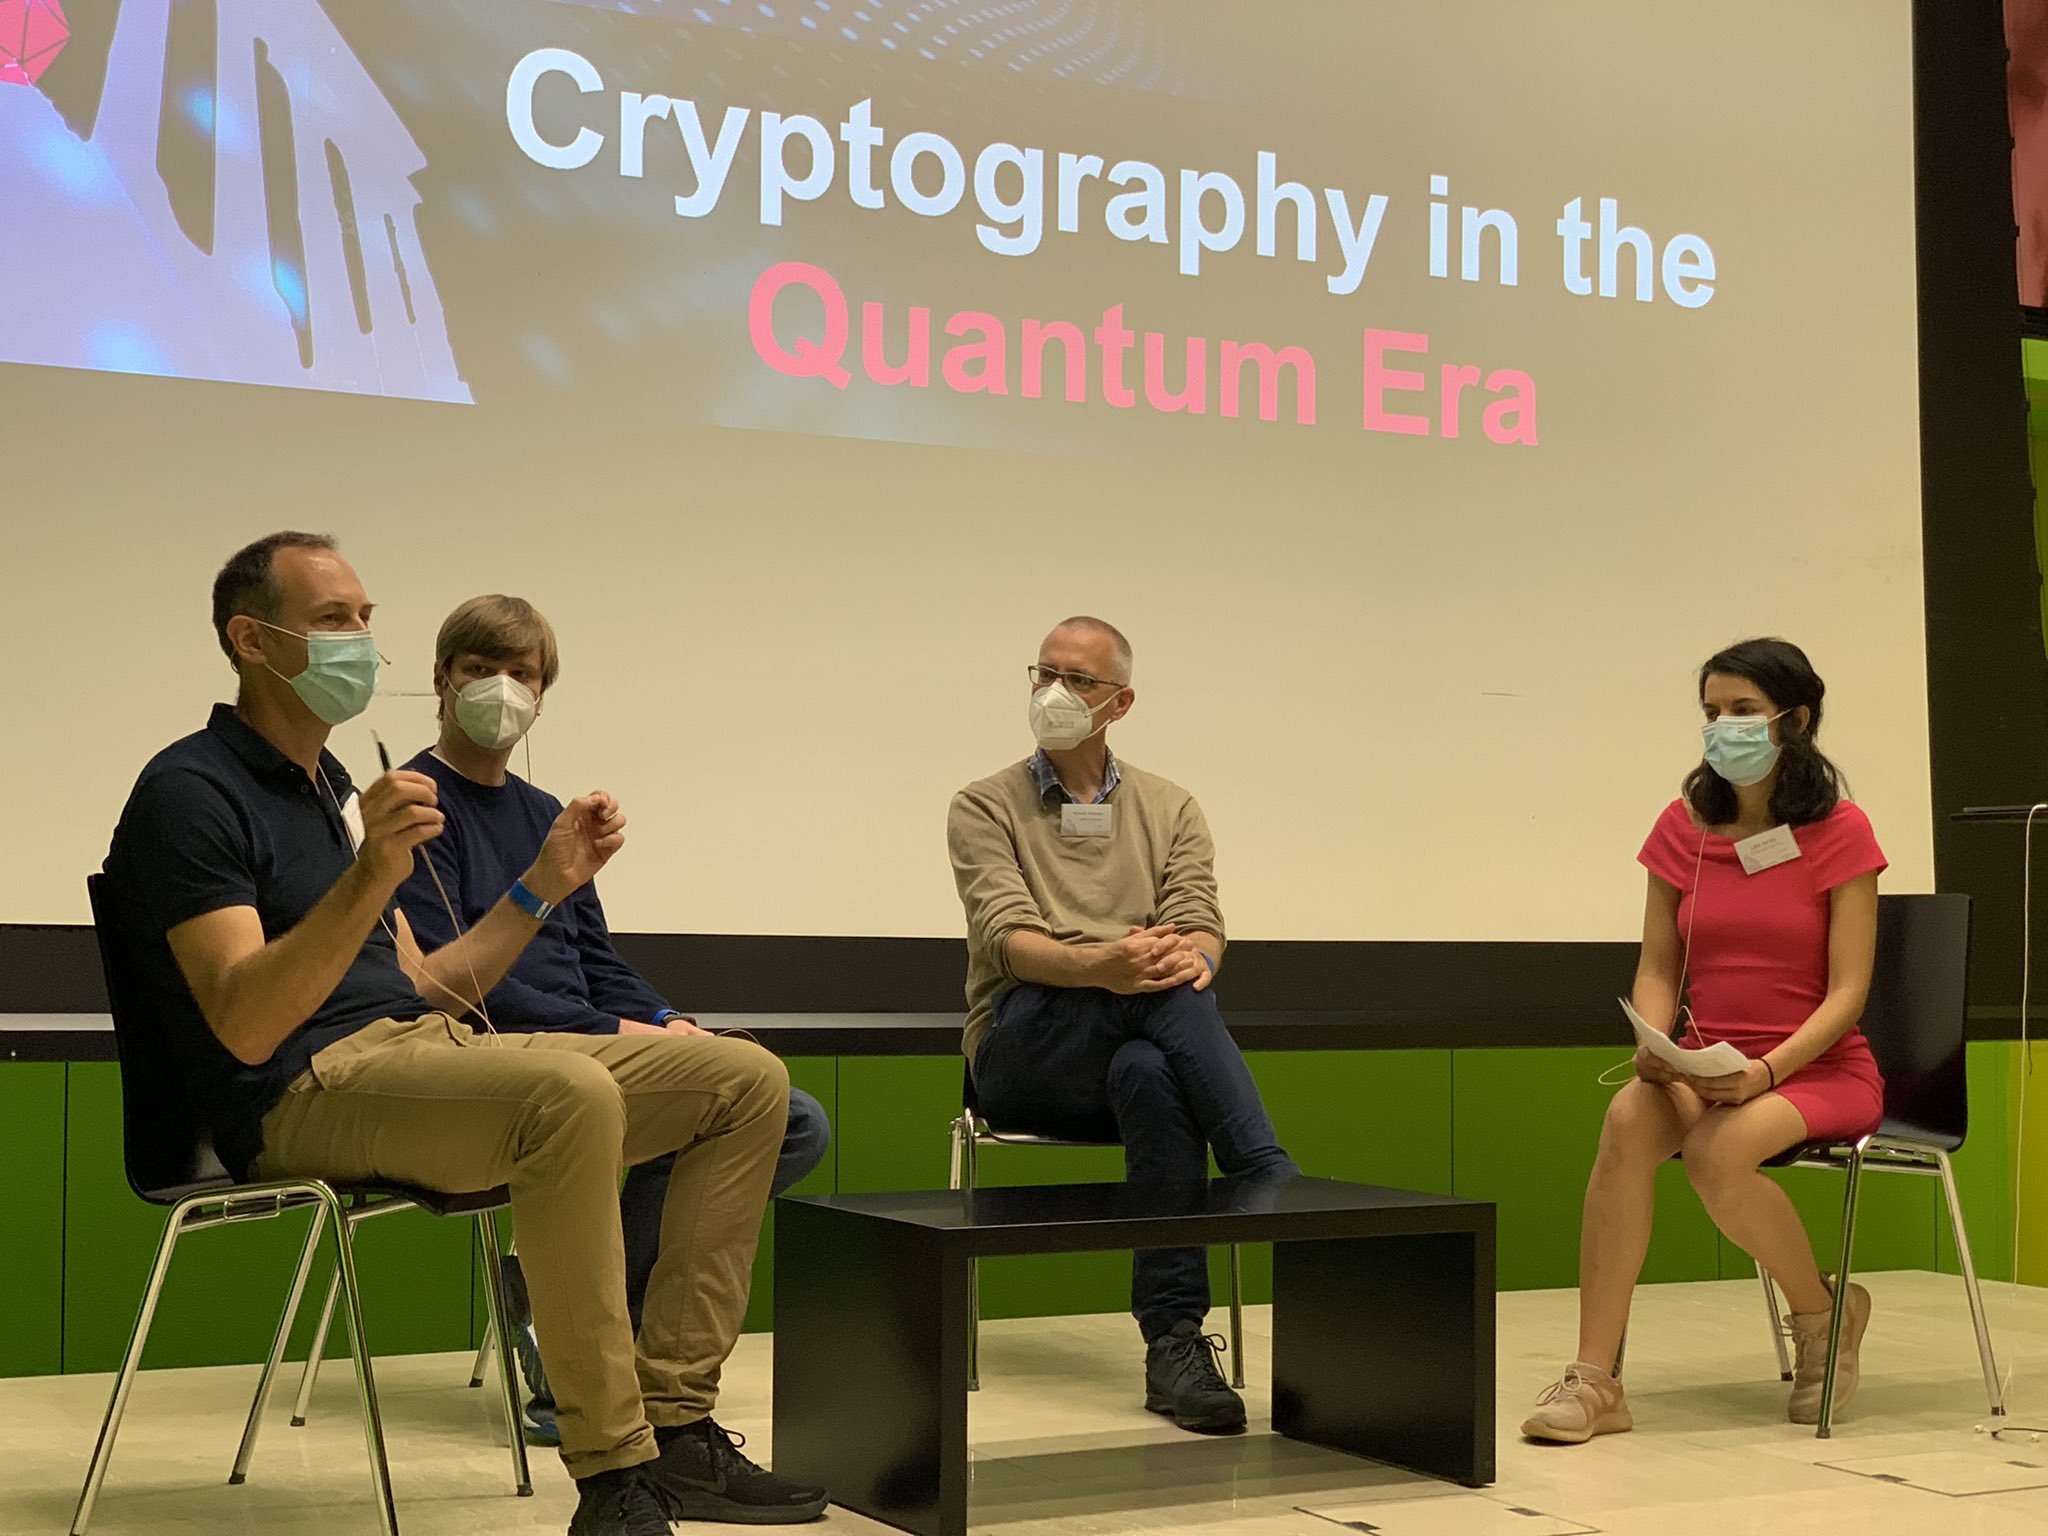 Panel discussion on cryptography in the quantum computing era with Dennis Hofheinz, Kenneth Paterson and Renato Renner, moderated by Lídia del Rio.